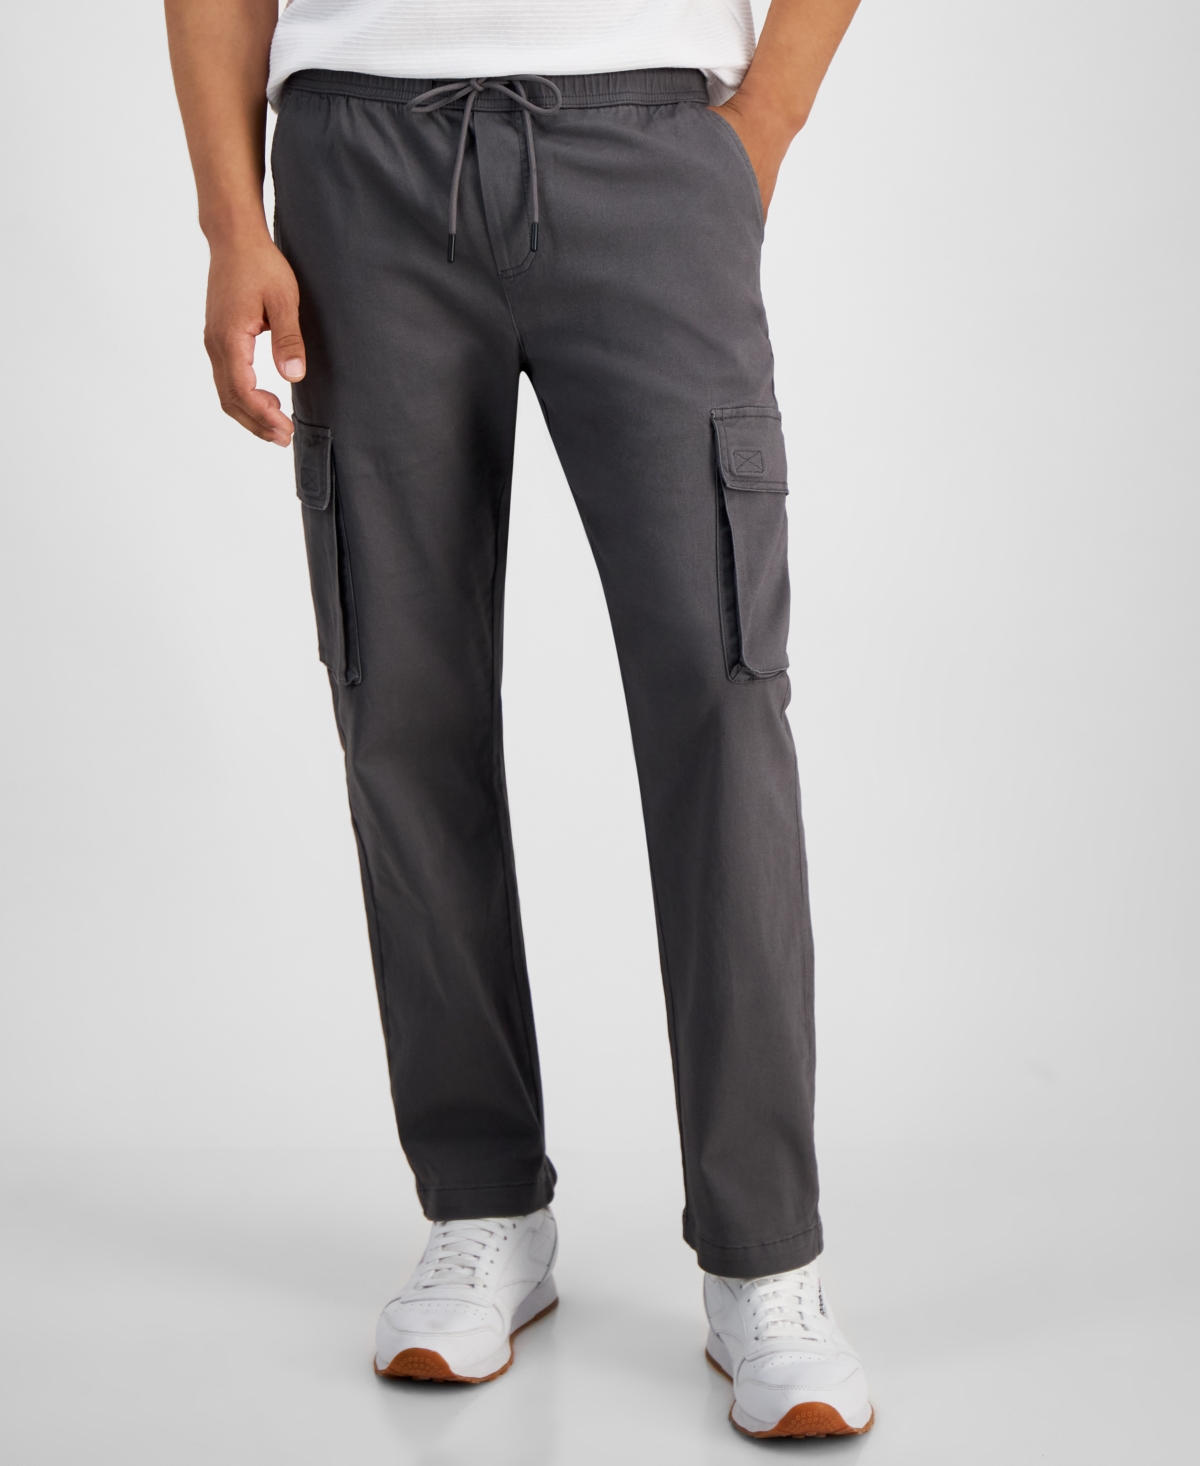 Men's Regular-Fit Twill Drawstring Cargo Pants, Created for Macy's - Charcoal